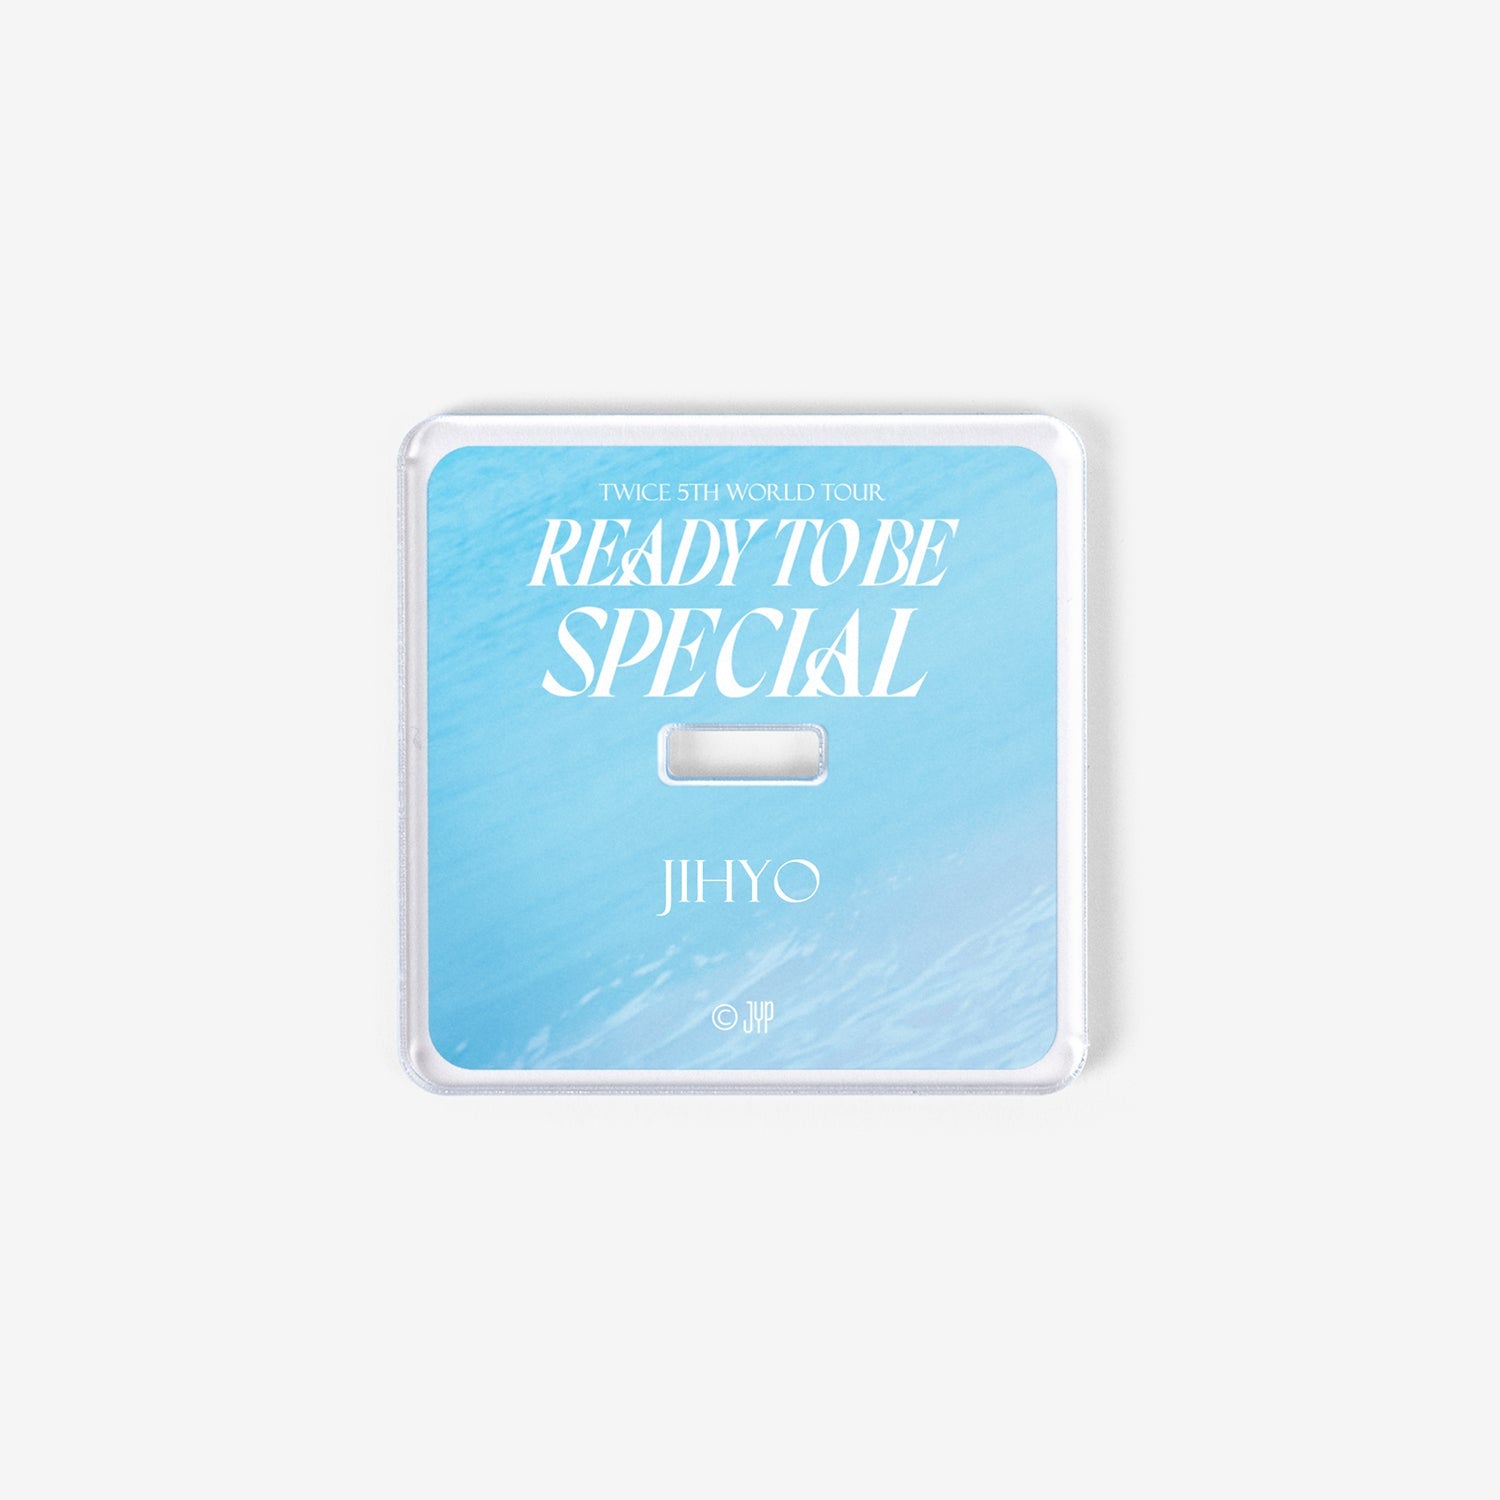 ACRYLIC STAND - JIHYO【SPECIAL】/ TWICE『READY TO BE SPECIAL』